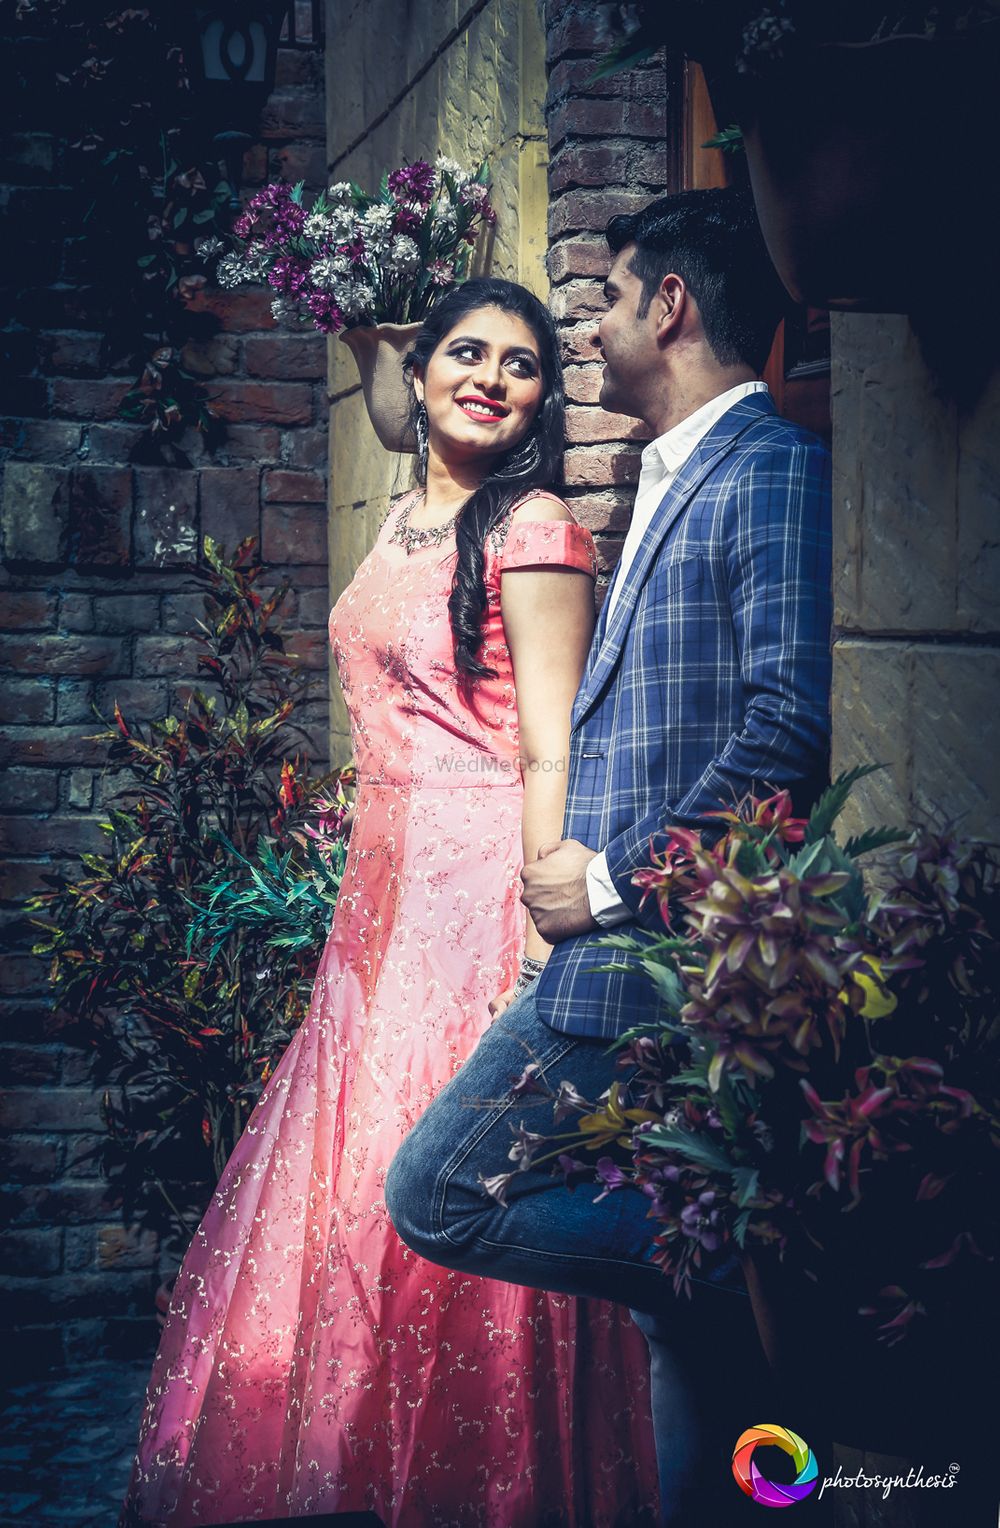 Photo From Prewedding Portfolio - By Photosynthesis Photography Services